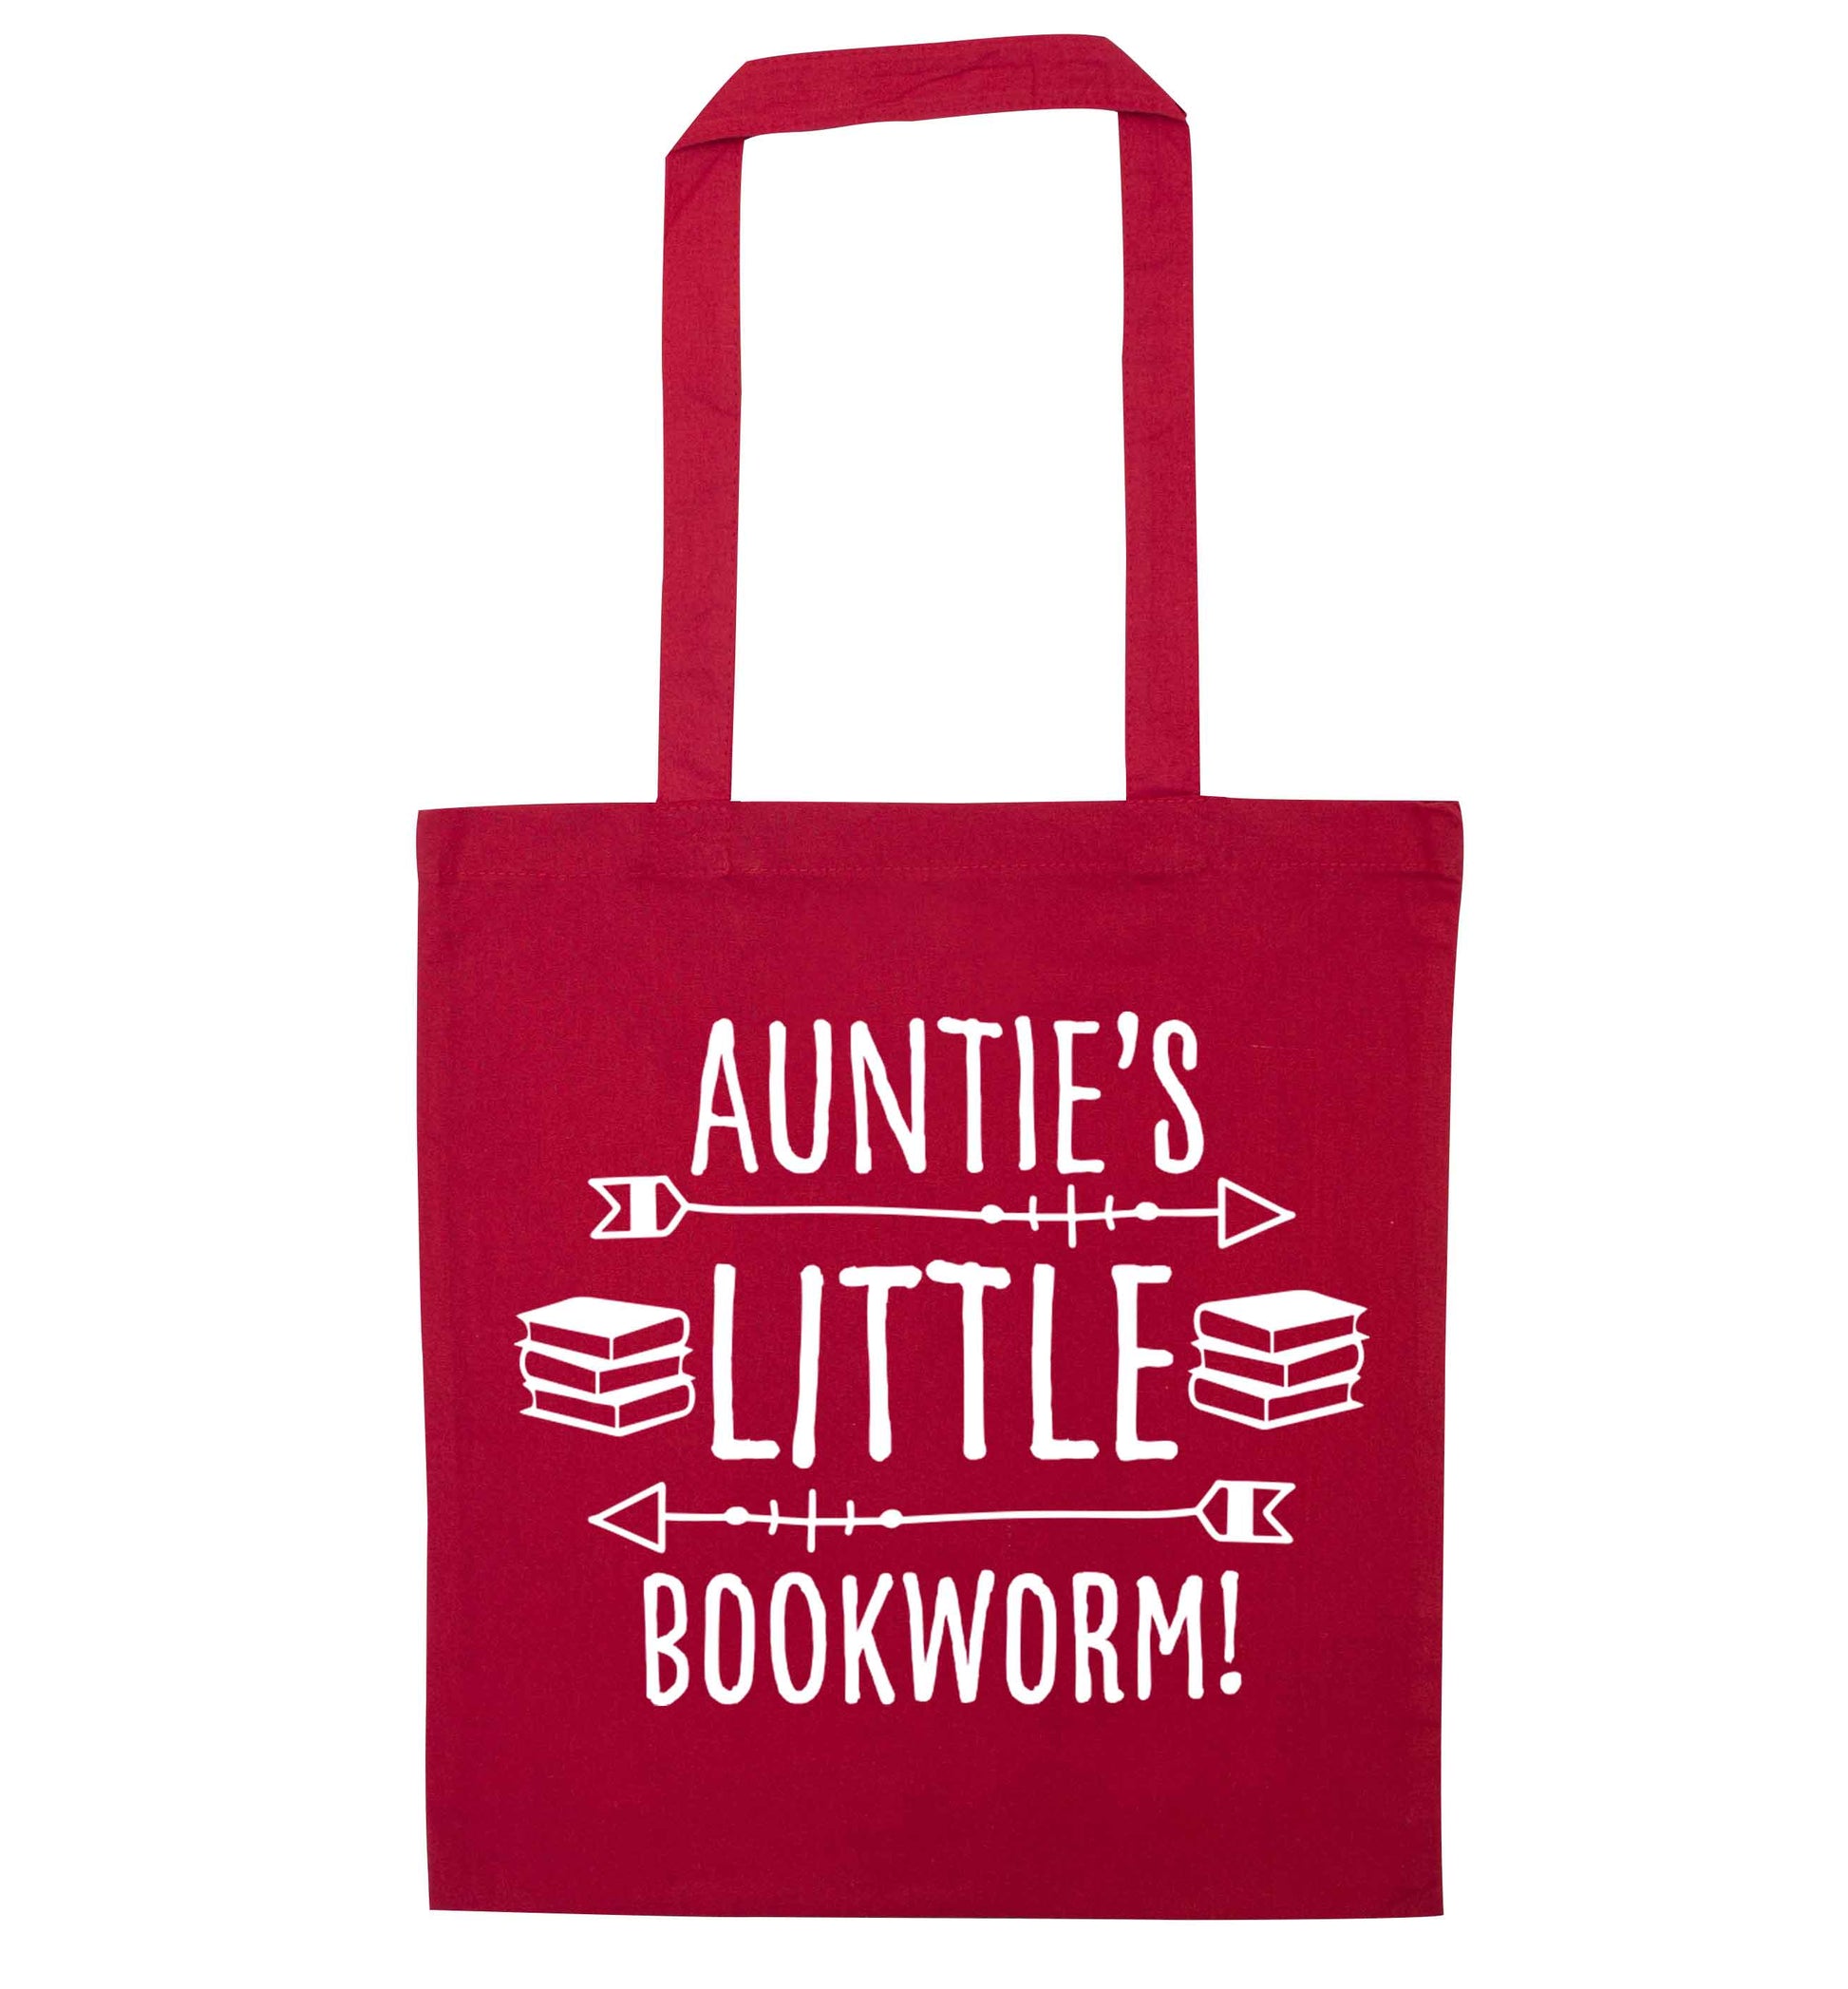 Auntie's little bookworm red tote bag